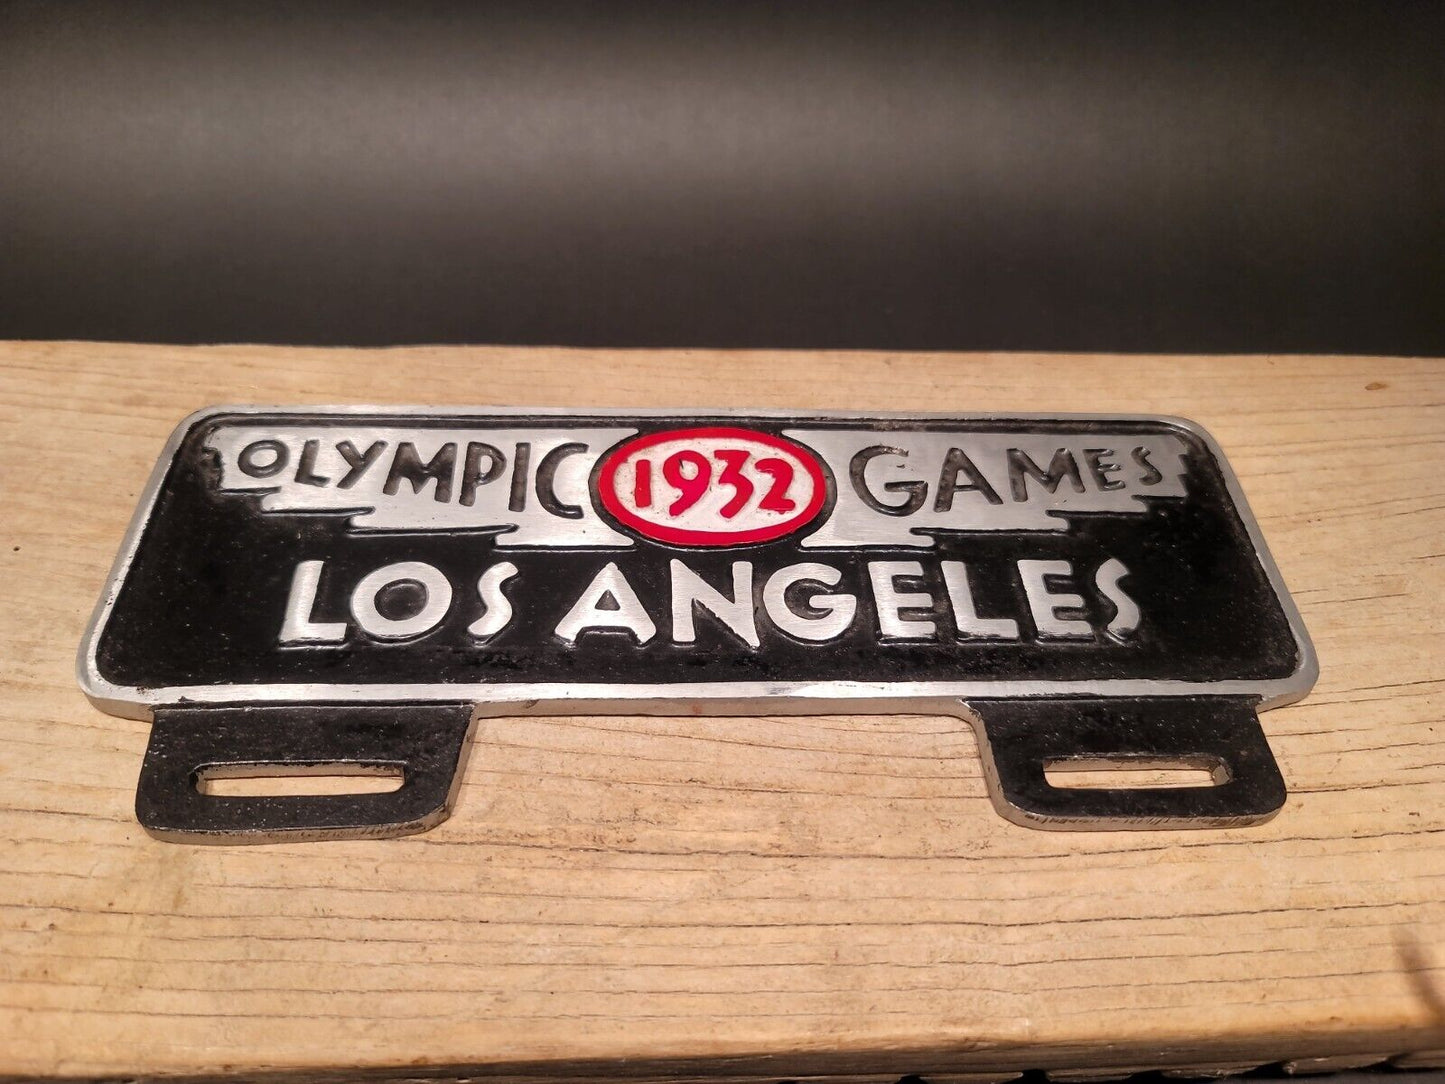 Antique Vintage Style Aluminum Olympic Games 1932 License Plate Fob Topper